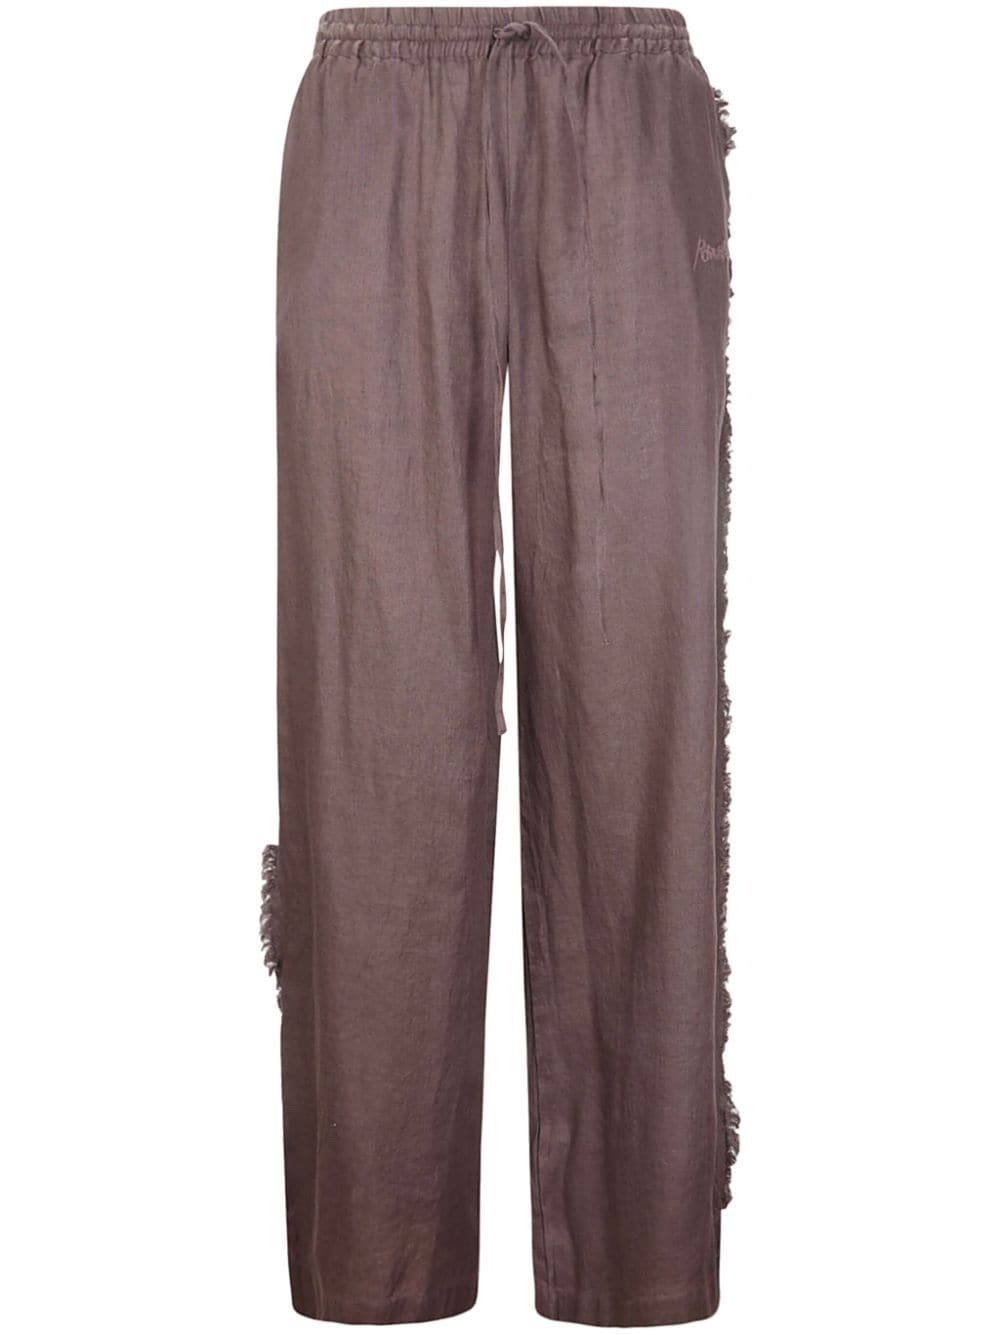 P.A.R.O.S.H. distressed-finish straight linen trousers Bruin